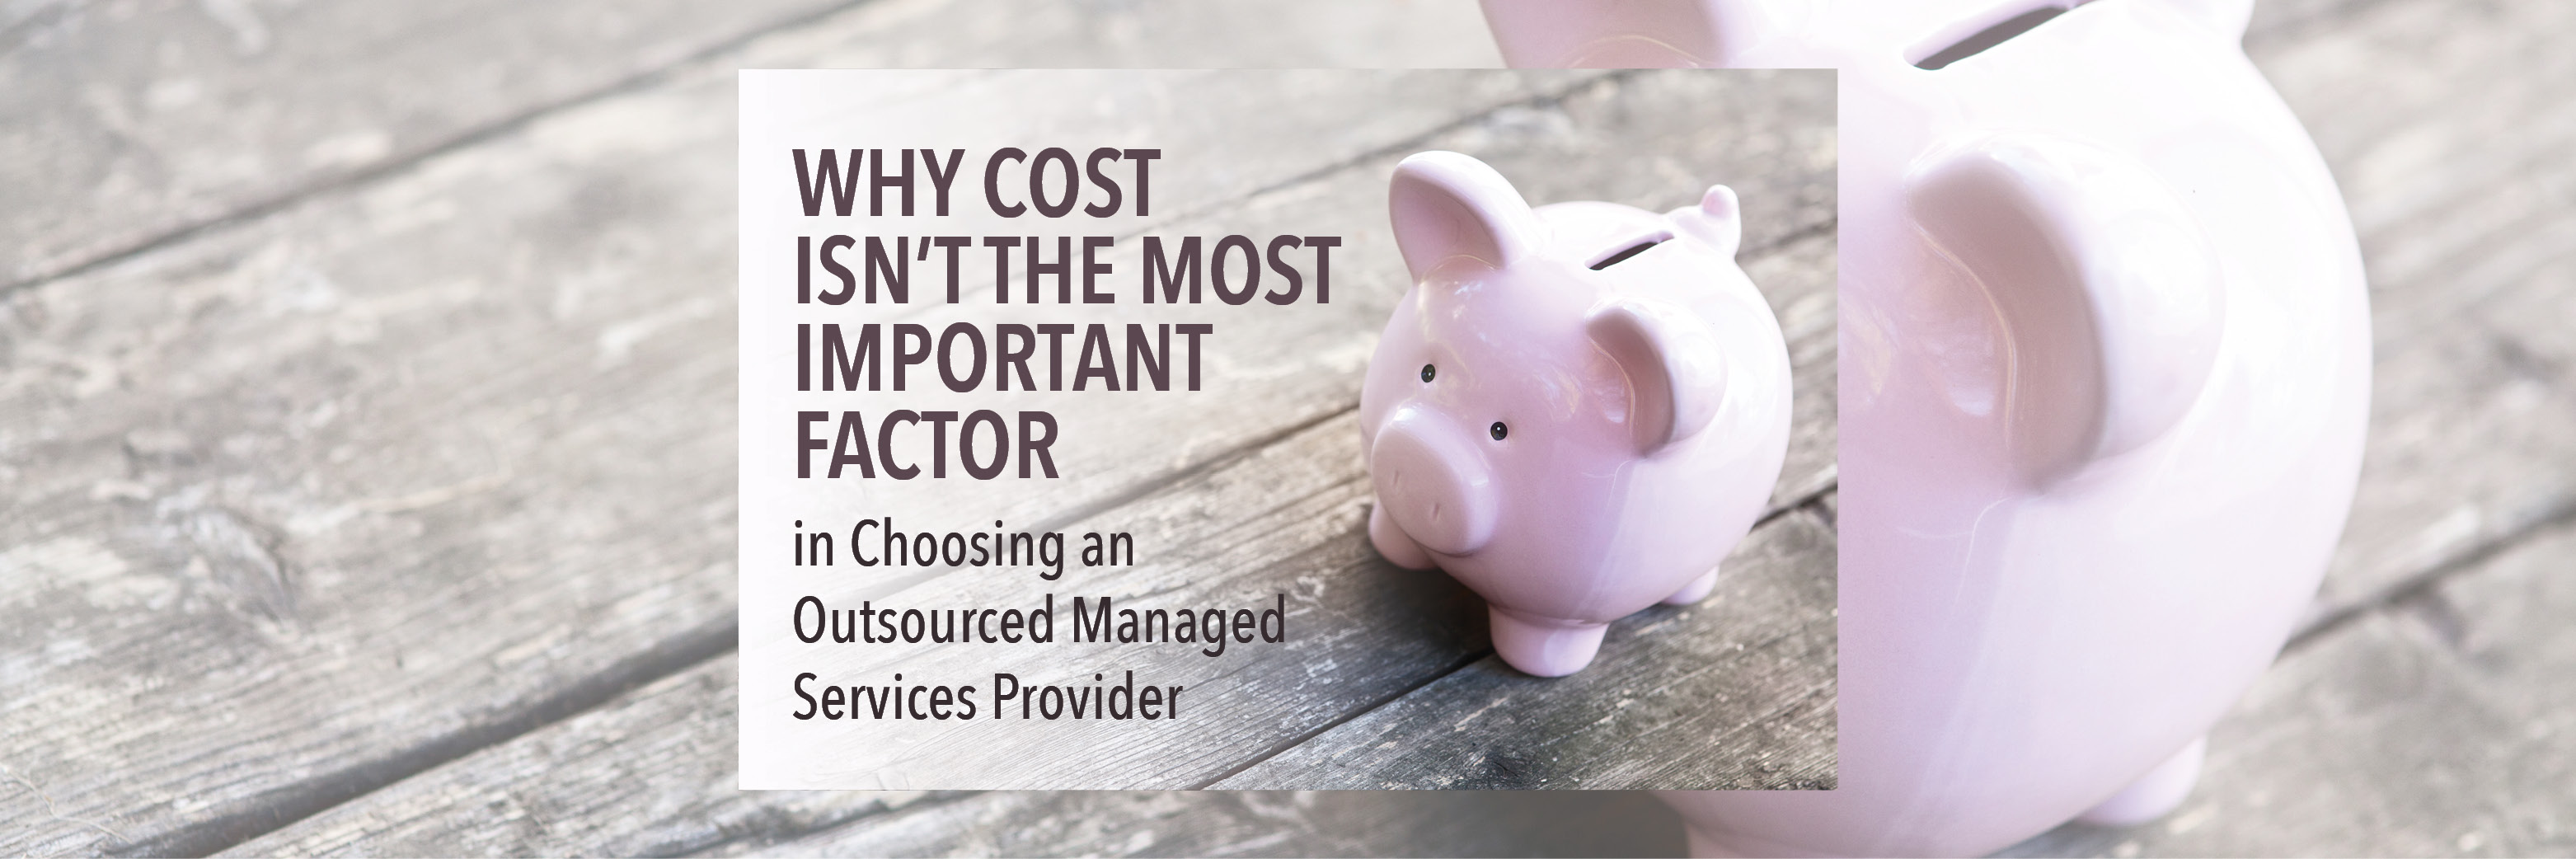 Why Cost Isn’t the Most Important Factor in Choosing an Outsourced Managed Services Provider